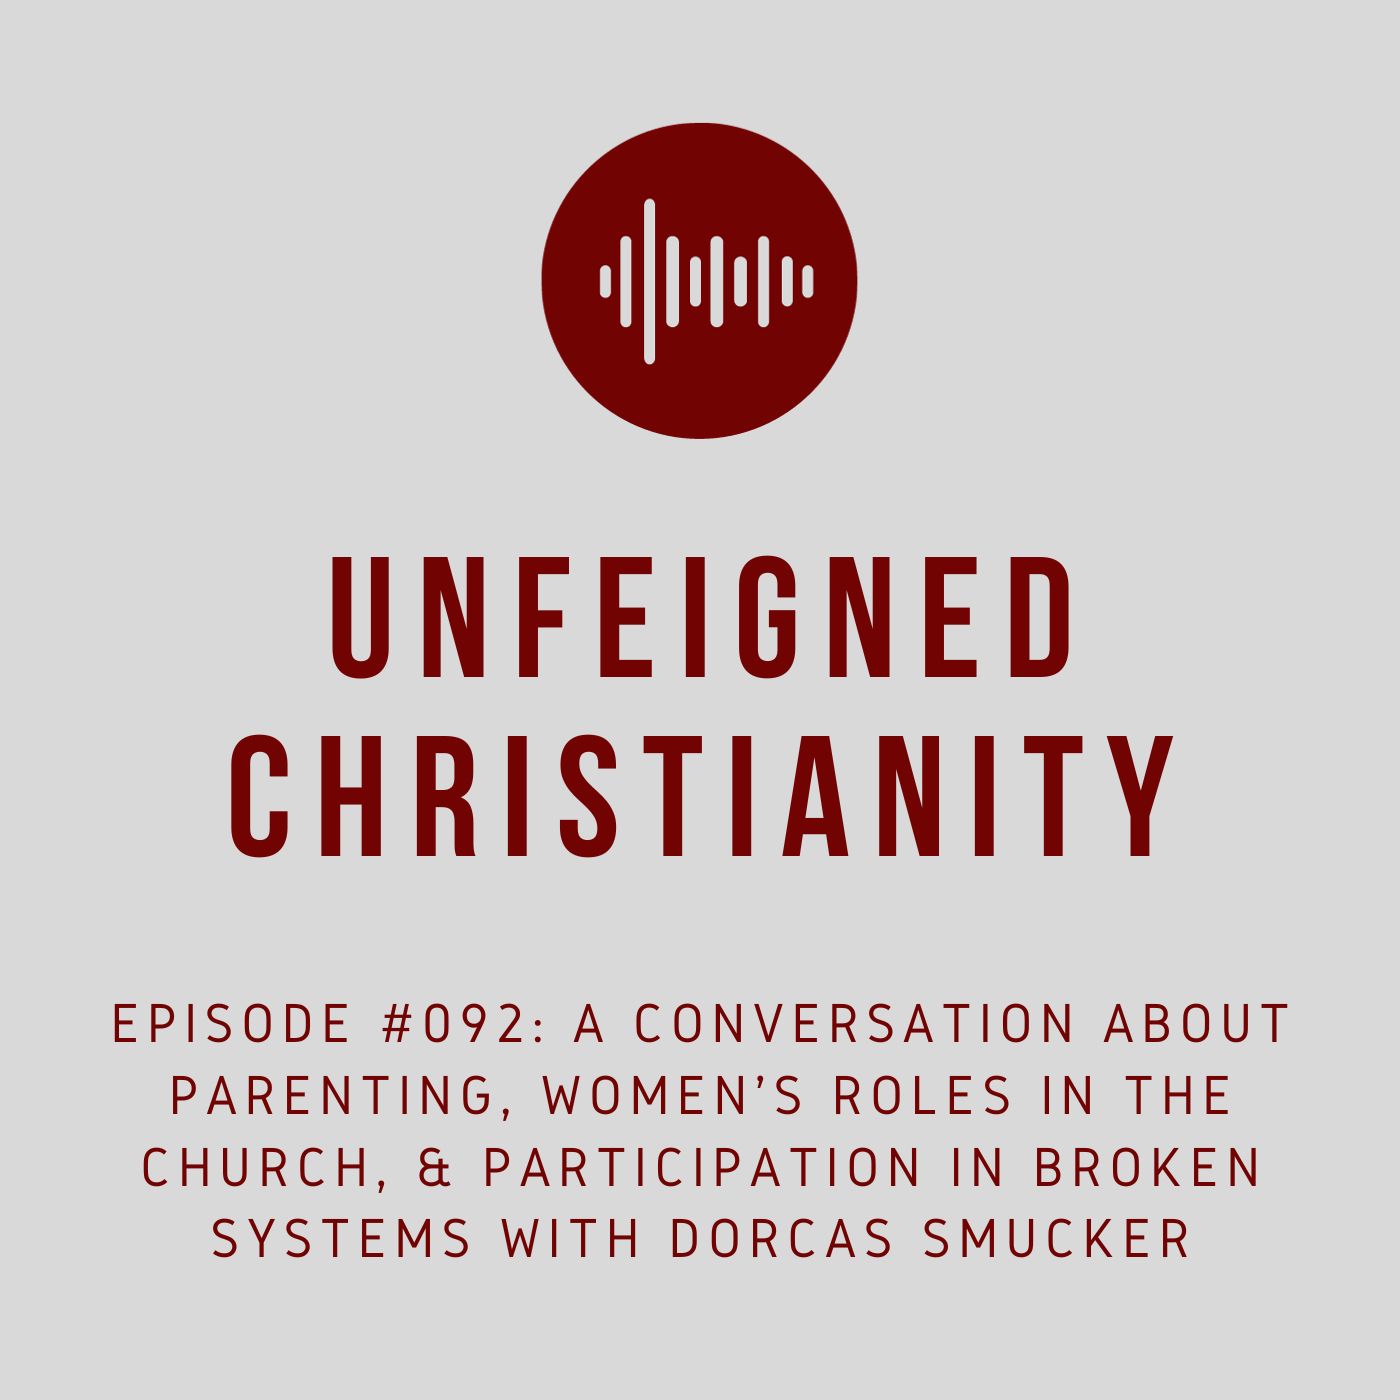 #092 - A Conversation about Parenting, Women's Roles in the Church, & Participation in Broken Systems with Dorcas Smucker